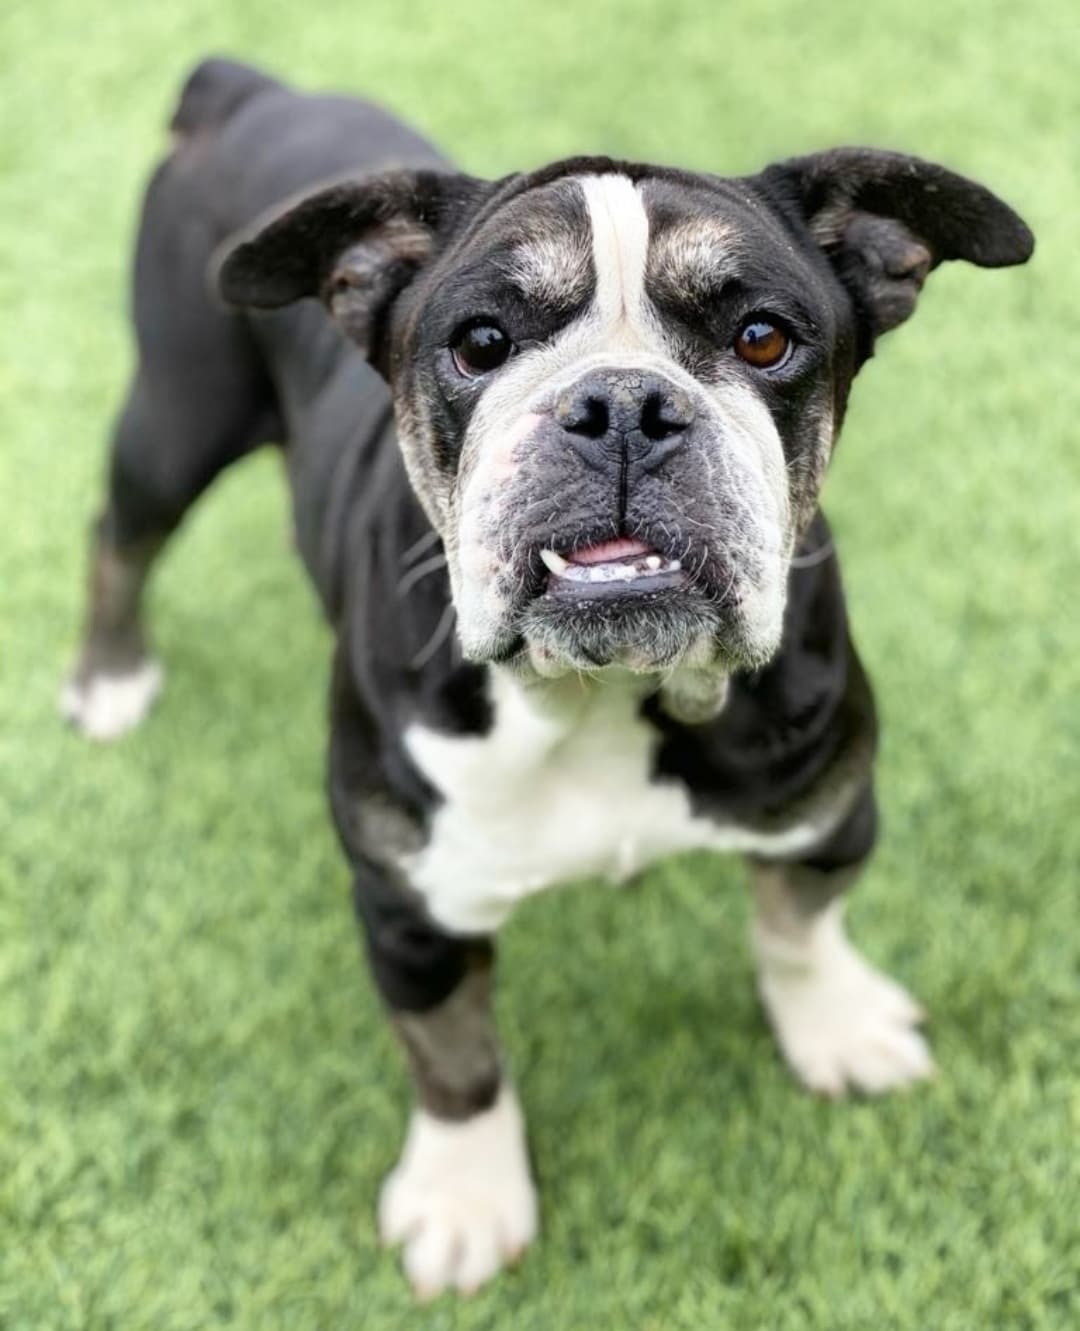 Due to no fault of her own, this sweet girl is back with us and looking for a forever home.

Meet Panda! This precious girl is a five year old olde english bulldog who was sadly overbred and dumped by an irresponsible breeder. After a rough life of living outdoors and only being used as a source of income for someone, she finally got to enjoy being in a home as a loved family member. Panda is FANTASTIC with children and spent many days going to schools to hang out with kids there.

She has so much love to give - she wiggles her whole body with every person she meets and does well with other dogs. She does great in the house and is an absolute gem. She's just under 40 pounds. If you think that you may be her new person, please fill out an application at gobeyondrescue.org